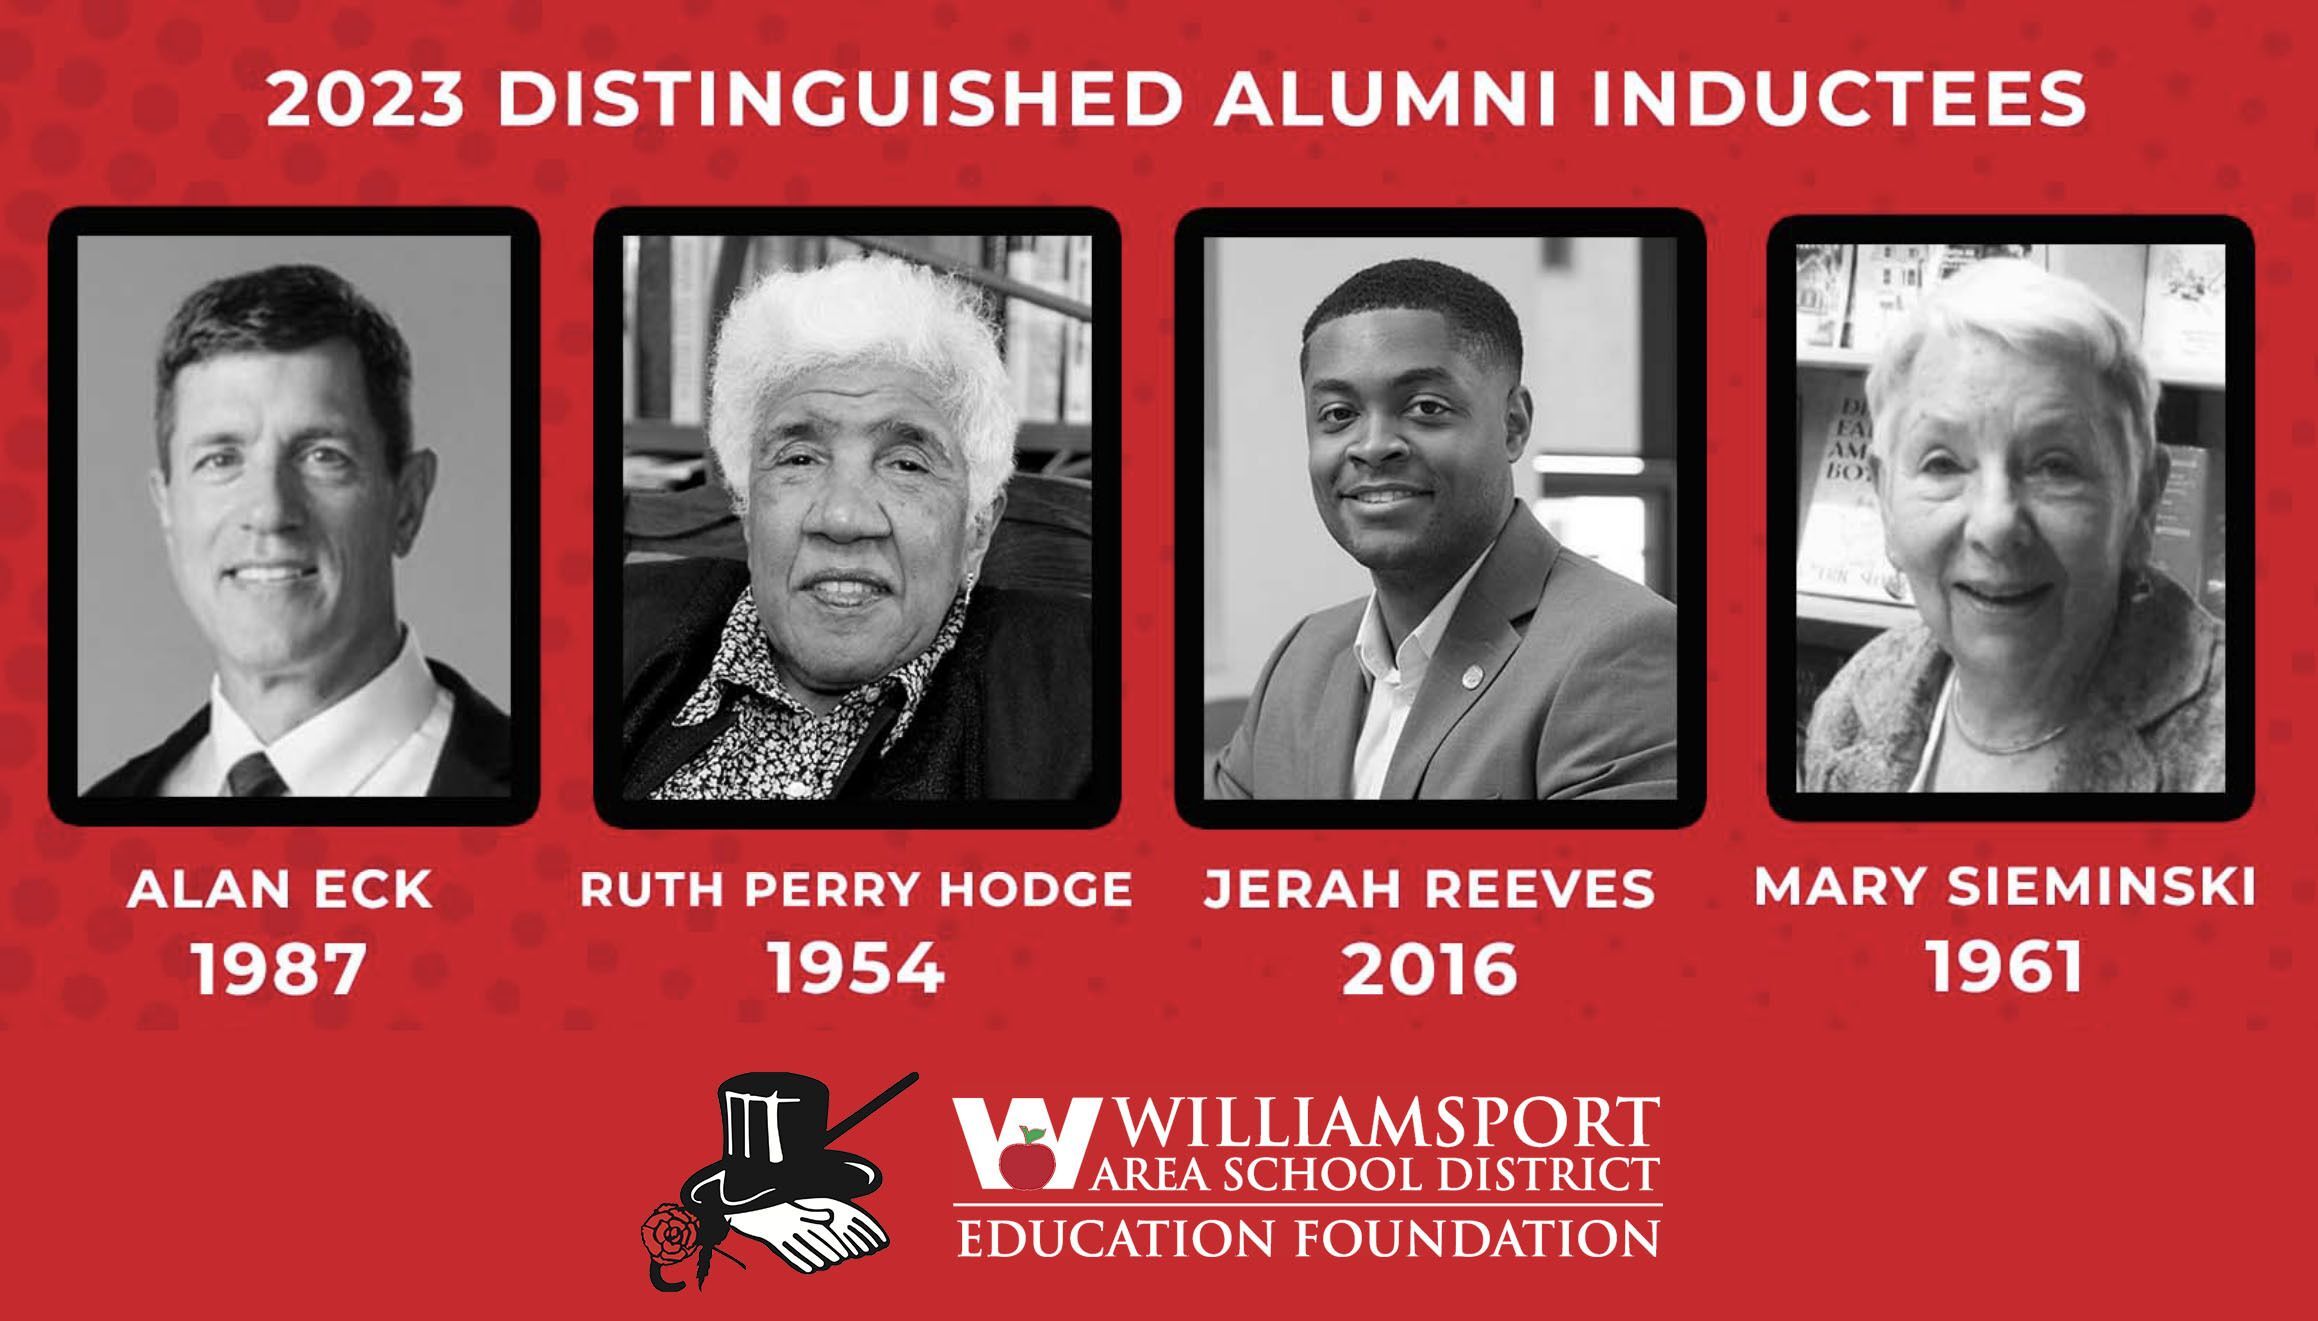 4 Selected to Receive 2023 Distinguished Alumni Awards